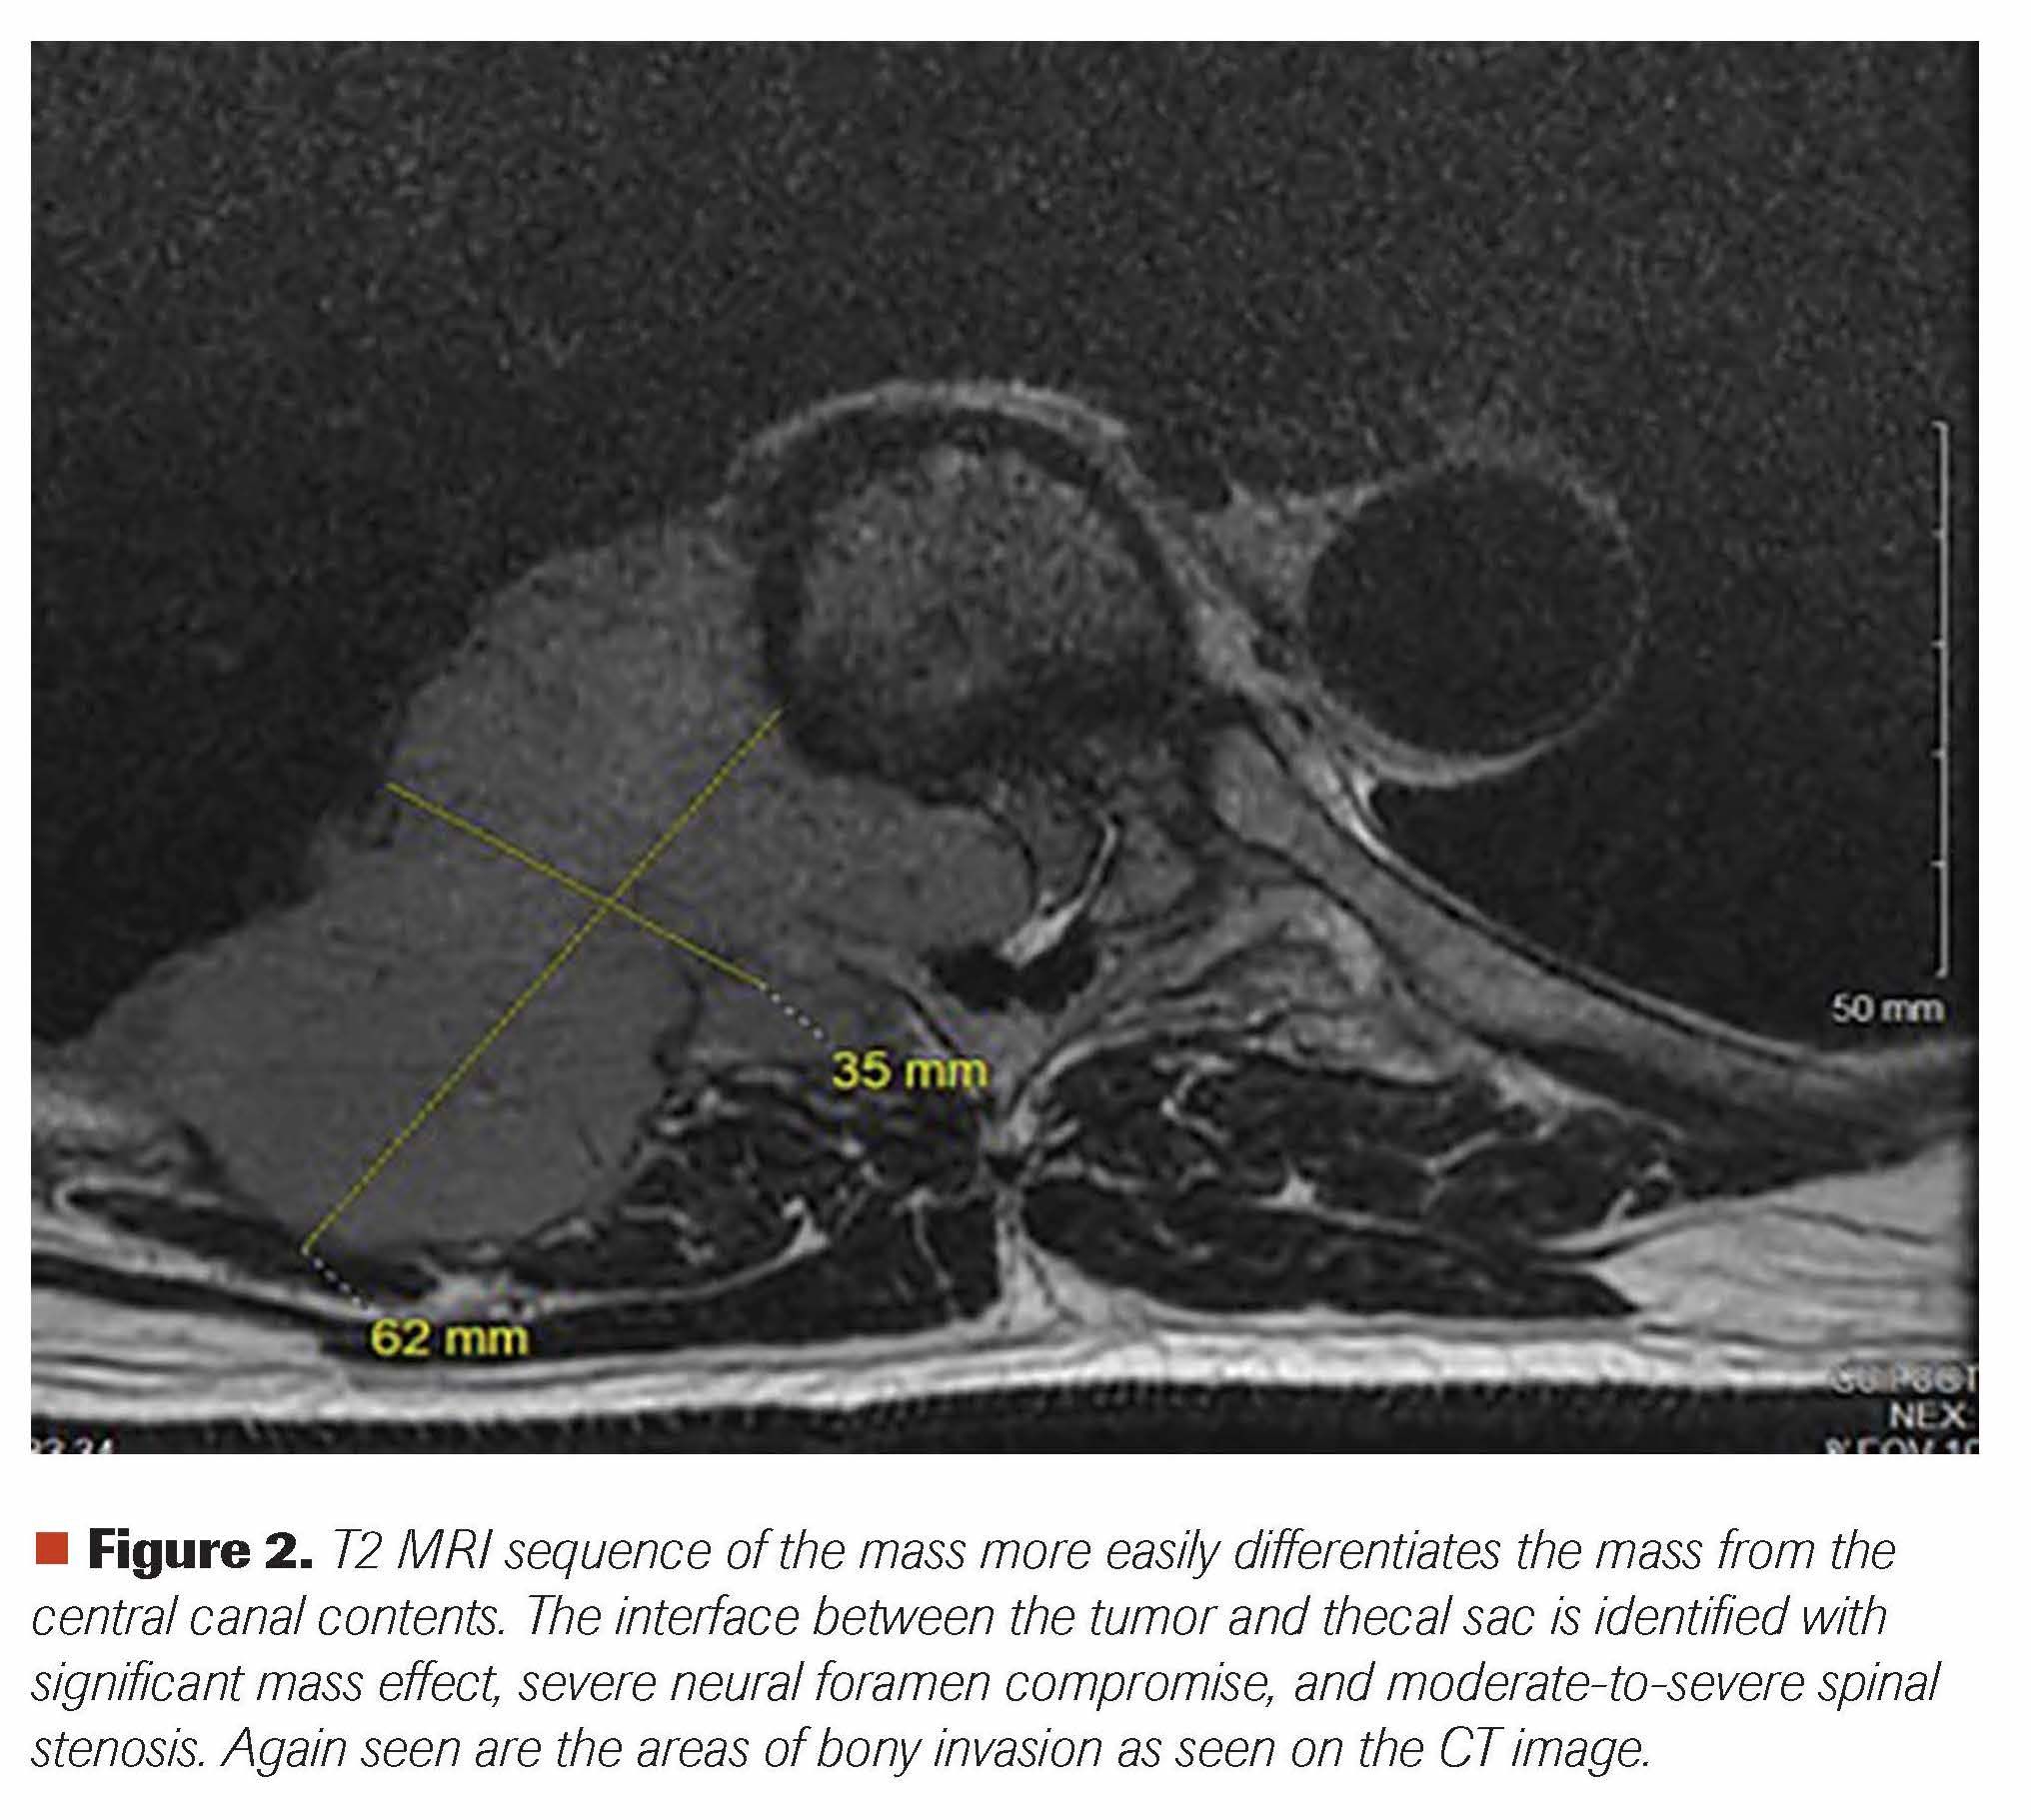 Figure 2. T2 MRI sequence of the mass more easily differentiates the mass from the central canal contents. The interface between the tumor and thecal sac is identified with significant mass effect, severe neural foramen compromise, and moderate-to-severe spinal stenosis. Again seen are the areas of bony invasion as seen on the CT image.